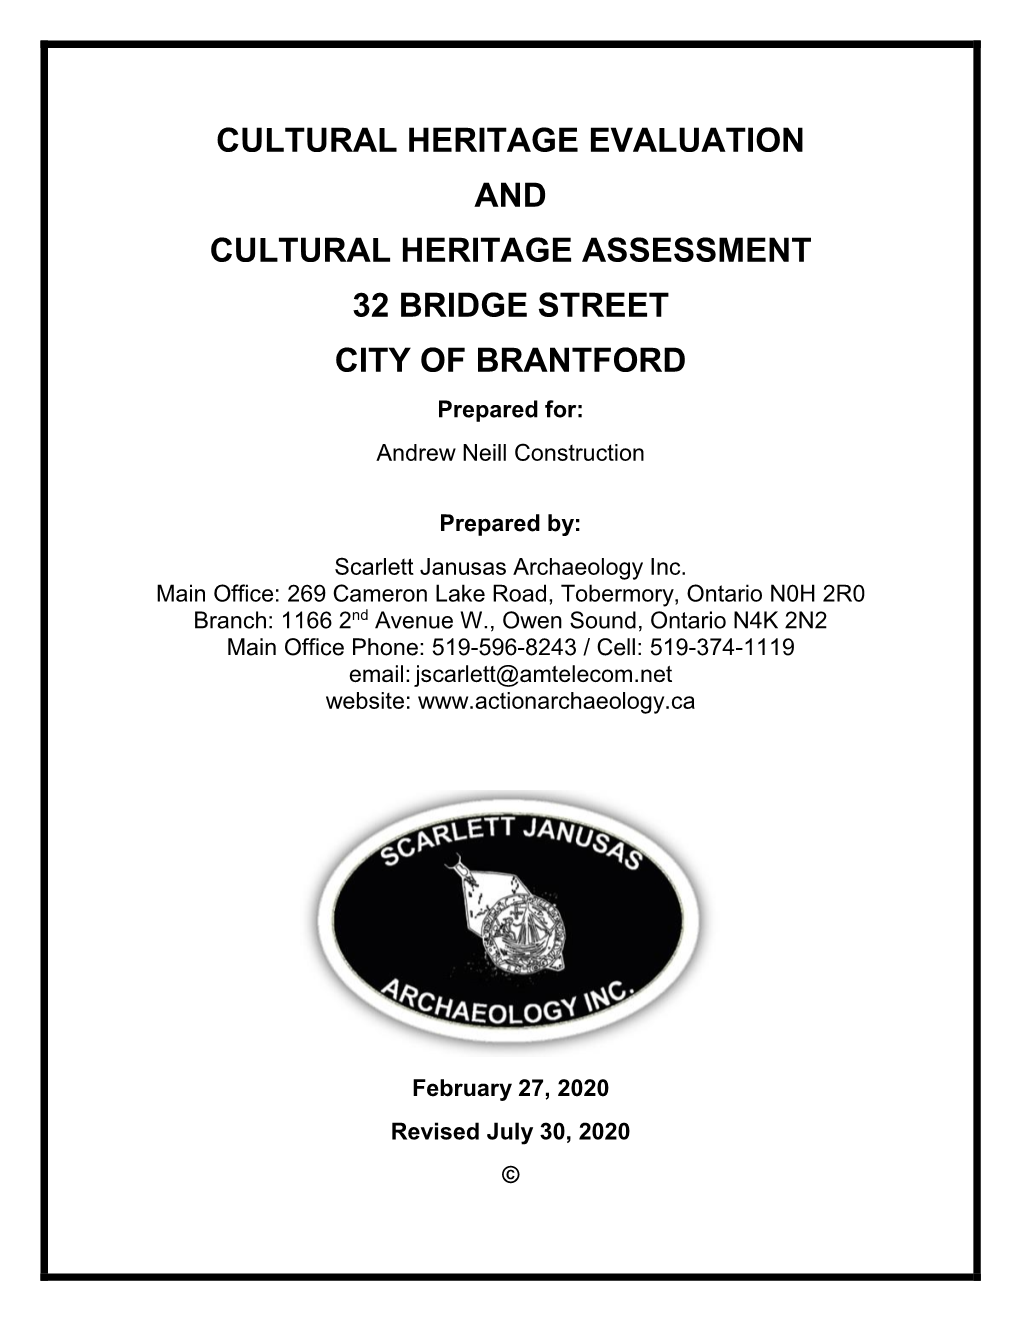 CULTURAL HERITAGE EVALUATION and CULTURAL HERITAGE ASSESSMENT 32 BRIDGE STREET CITY of BRANTFORD Prepared For: Andrew Neill Construction